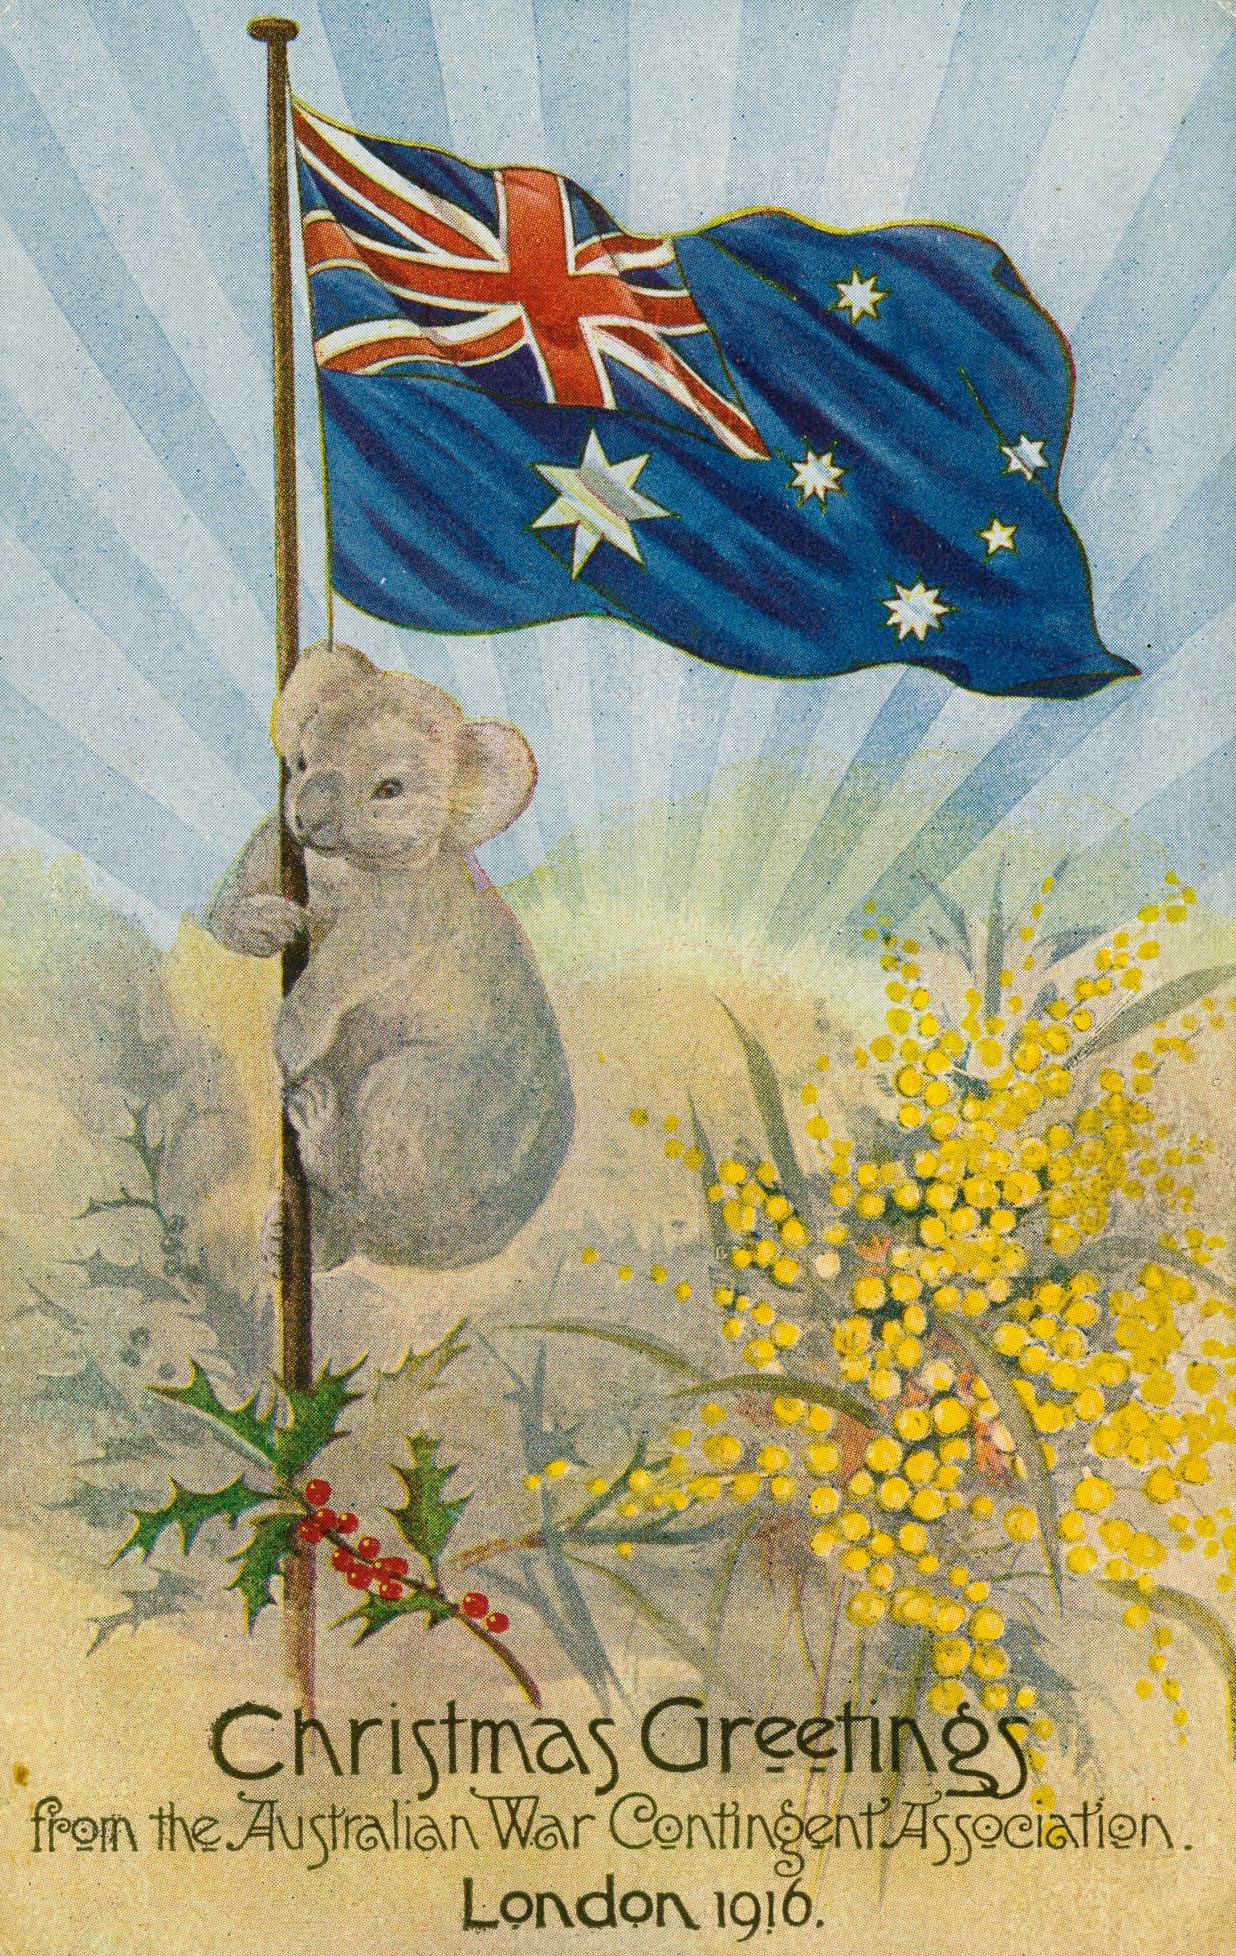 ‘Christmas greetings from the Australian War Contingent Association’ postcard, 1916.